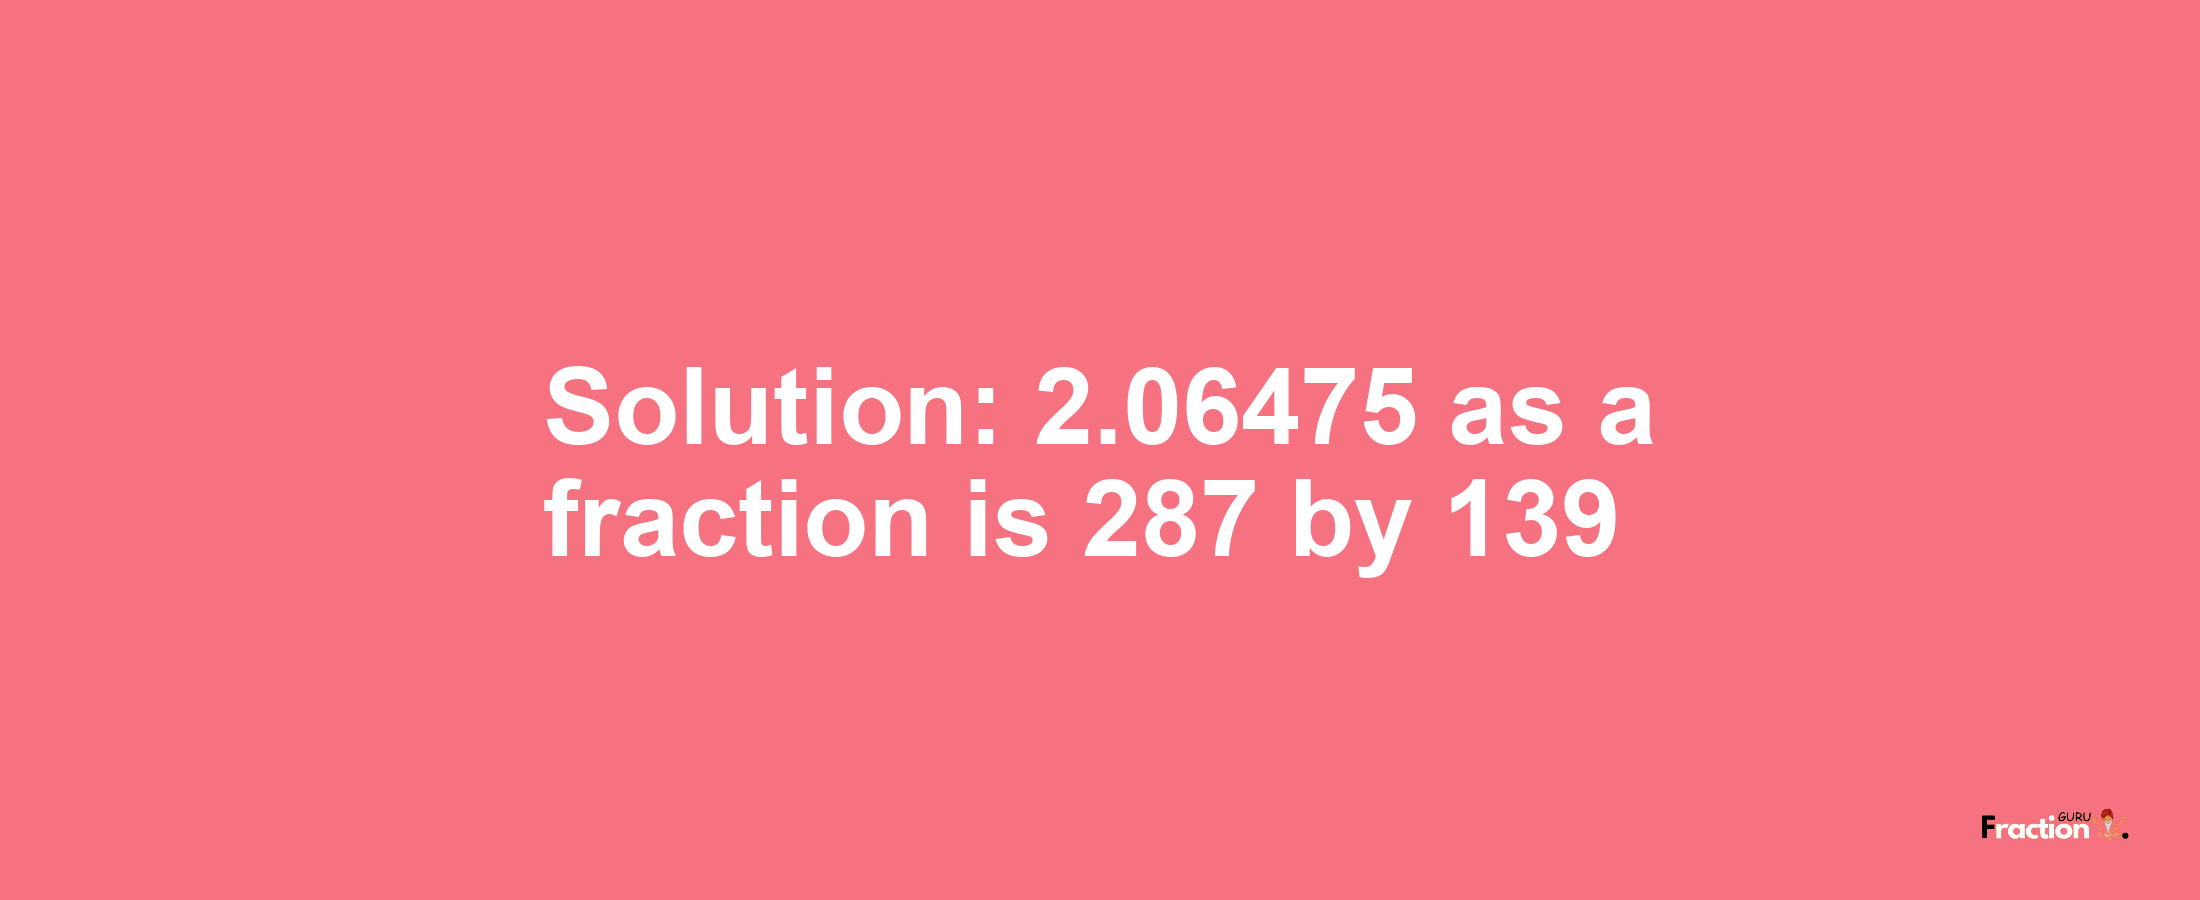 Solution:2.06475 as a fraction is 287/139